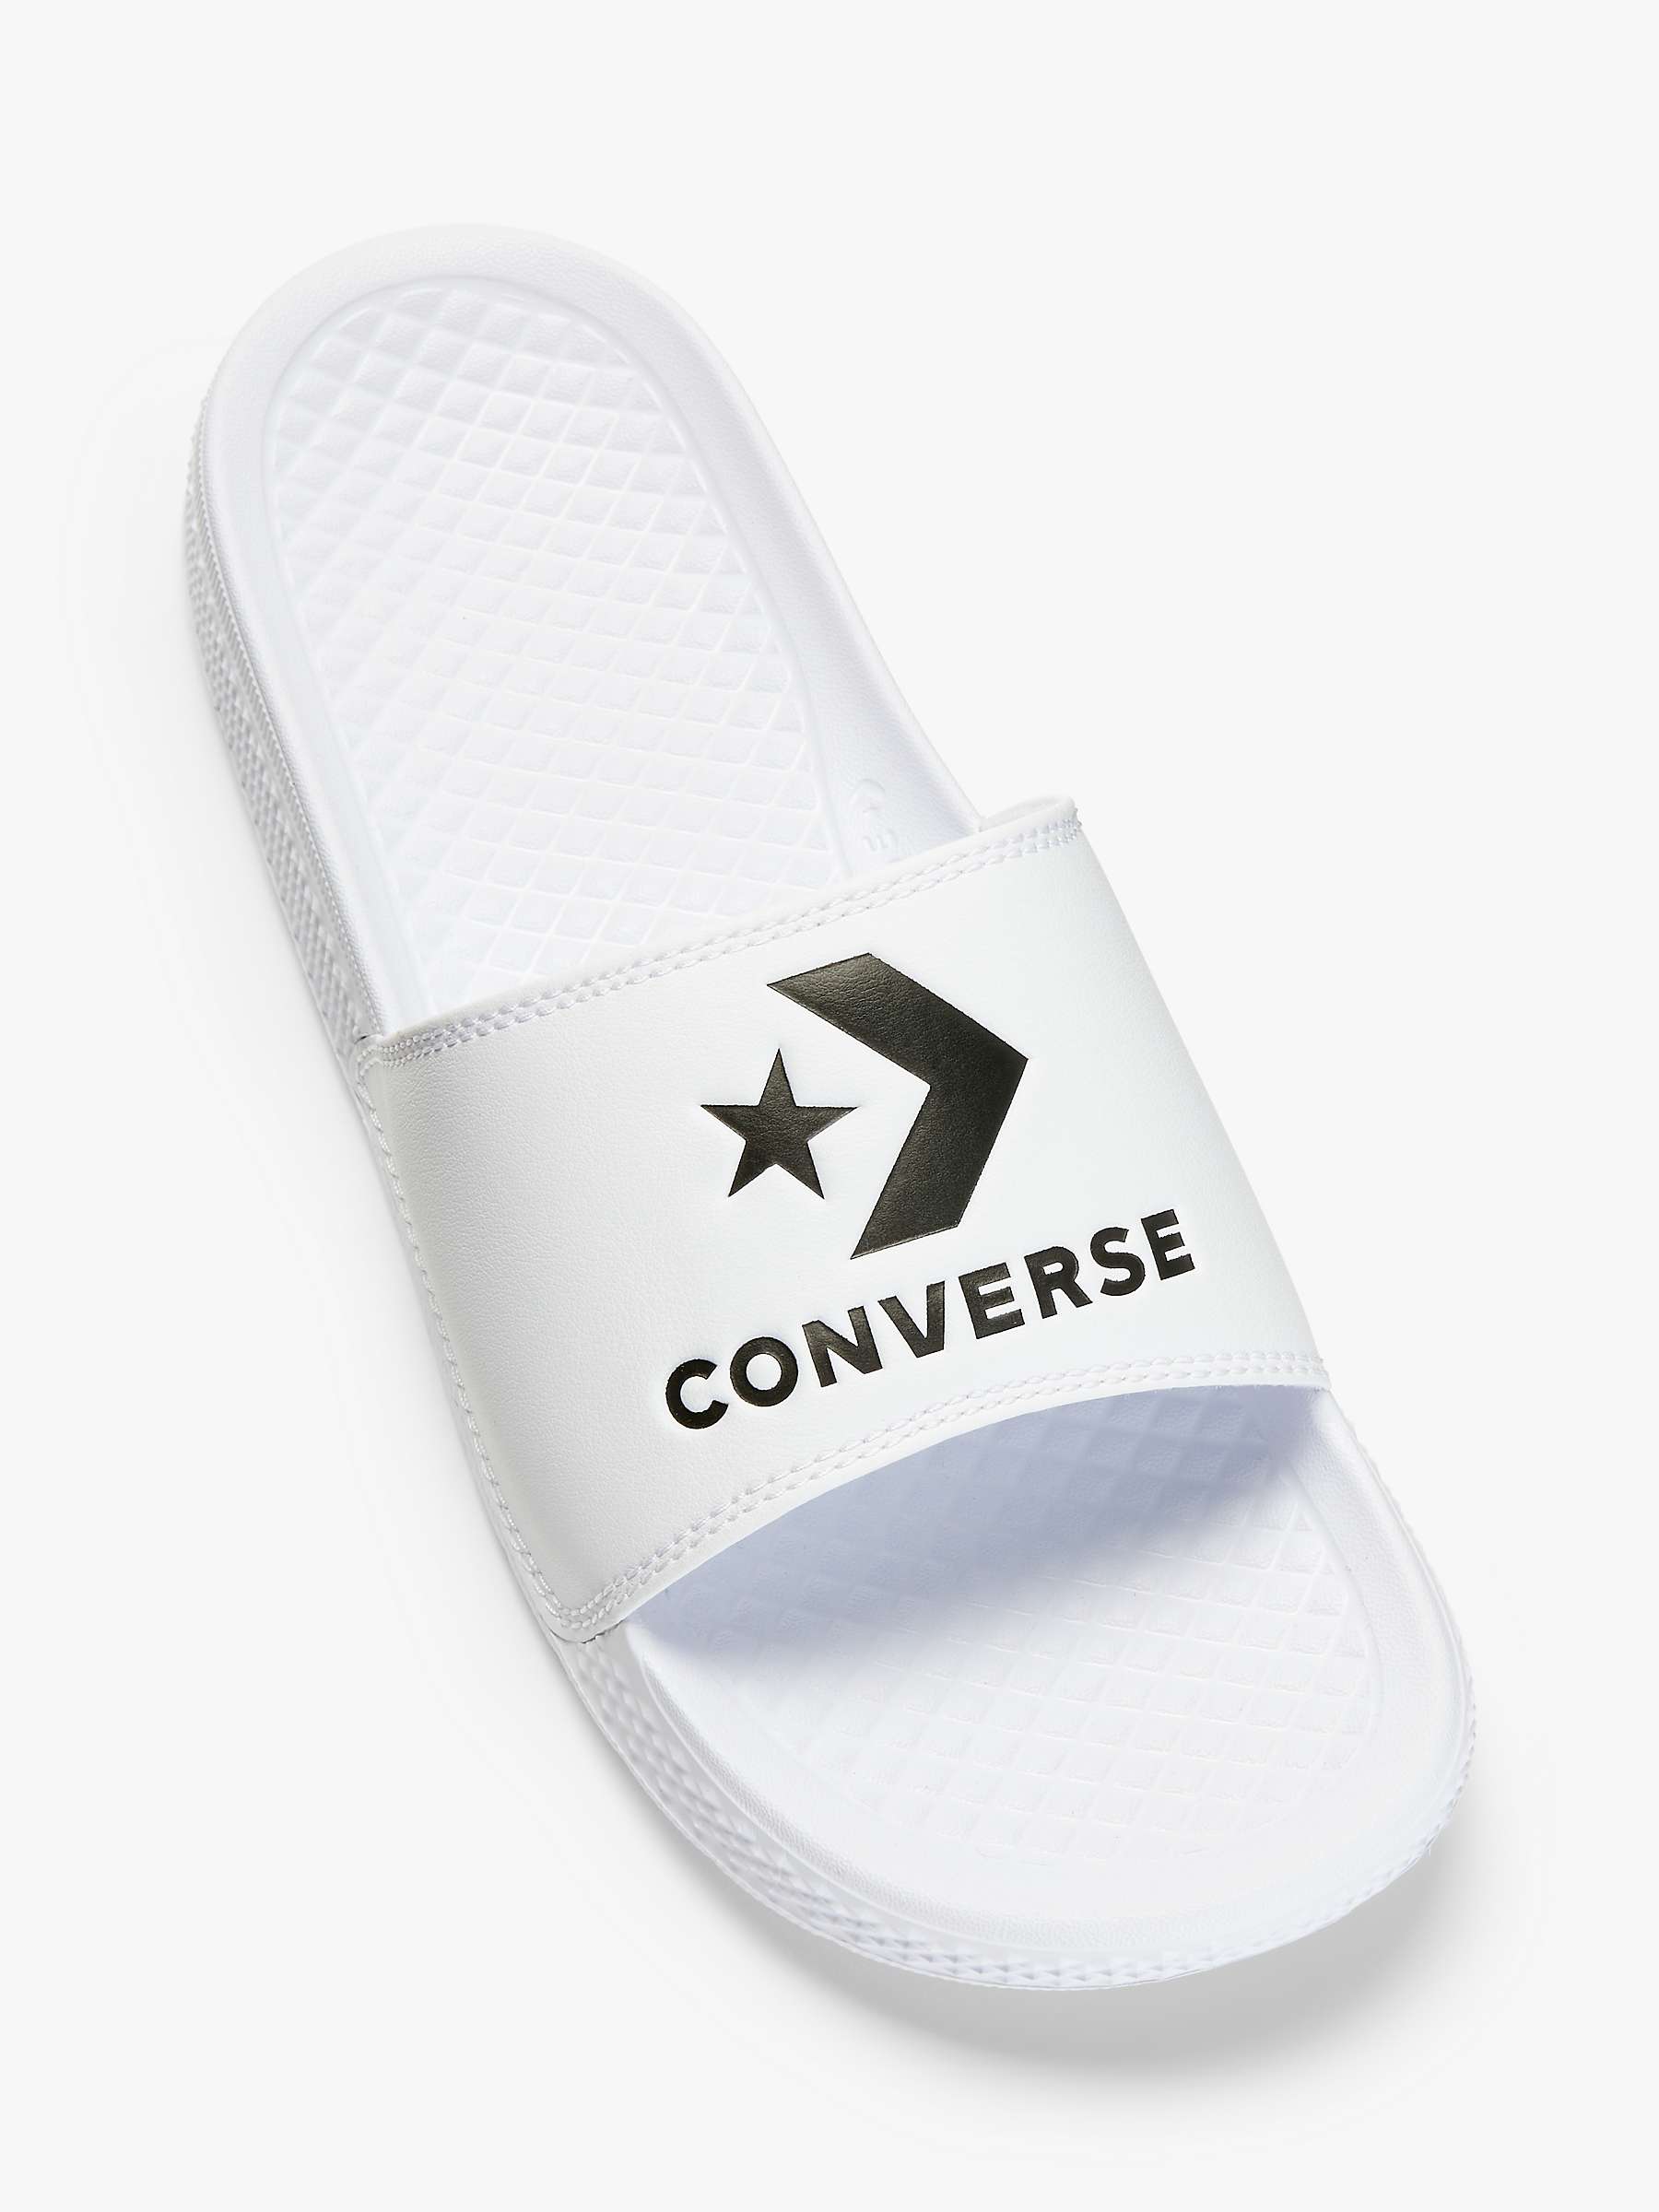 Buy Converse All Star Low Top Sliders Online at johnlewis.com